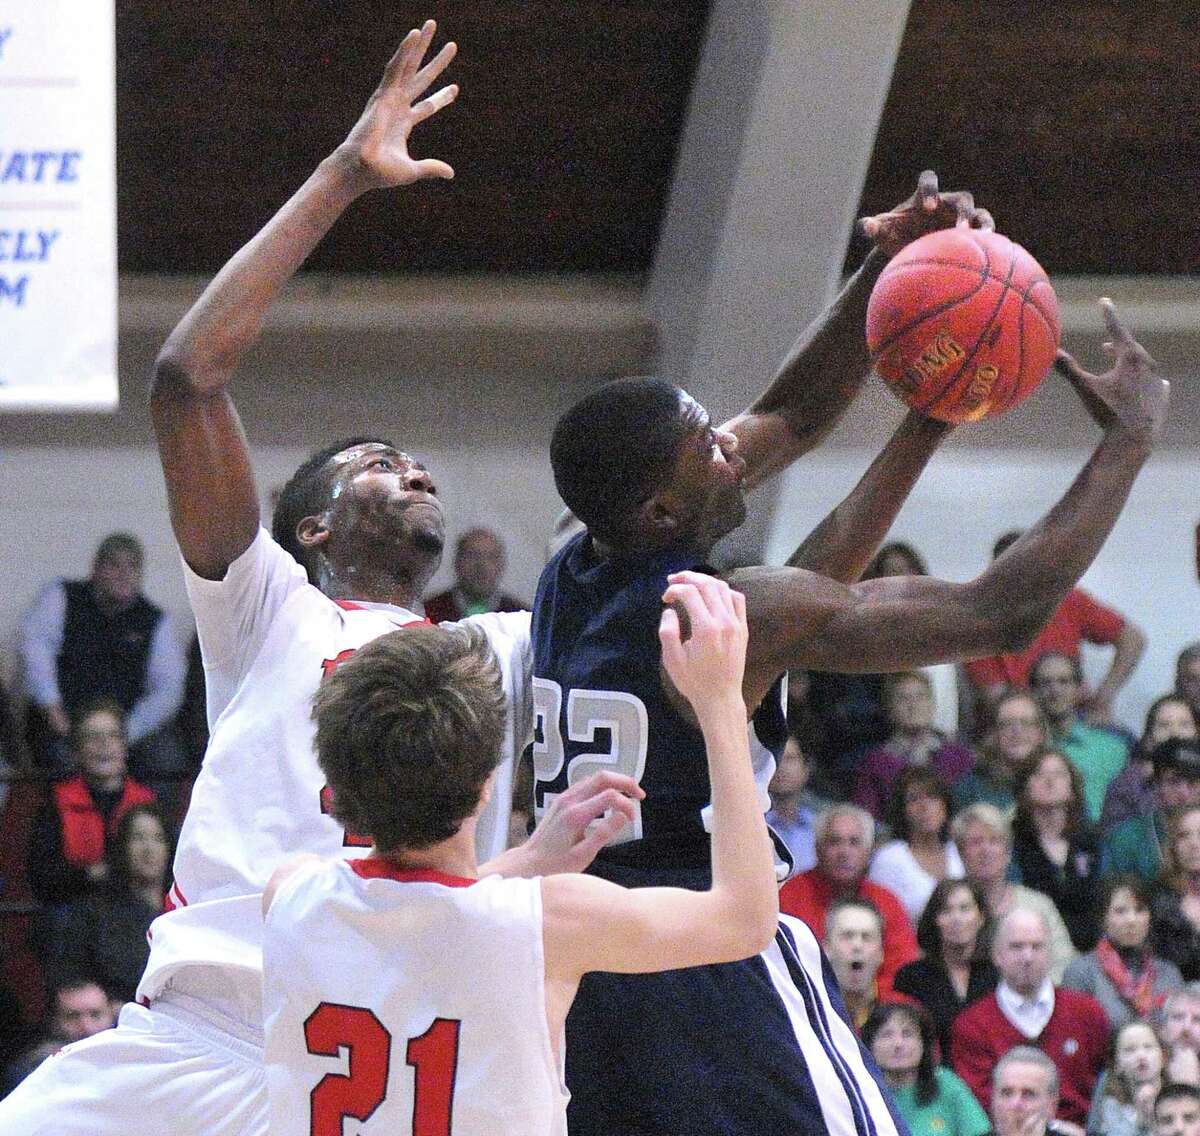 Fairfield Prep’s Paschal Chukwu battles for a rebound with Hillhouse’s Shane Christie during the fourth quarter during the Class LL boys basketball quarterfinals. (Peter Casolino-New Haven Register)